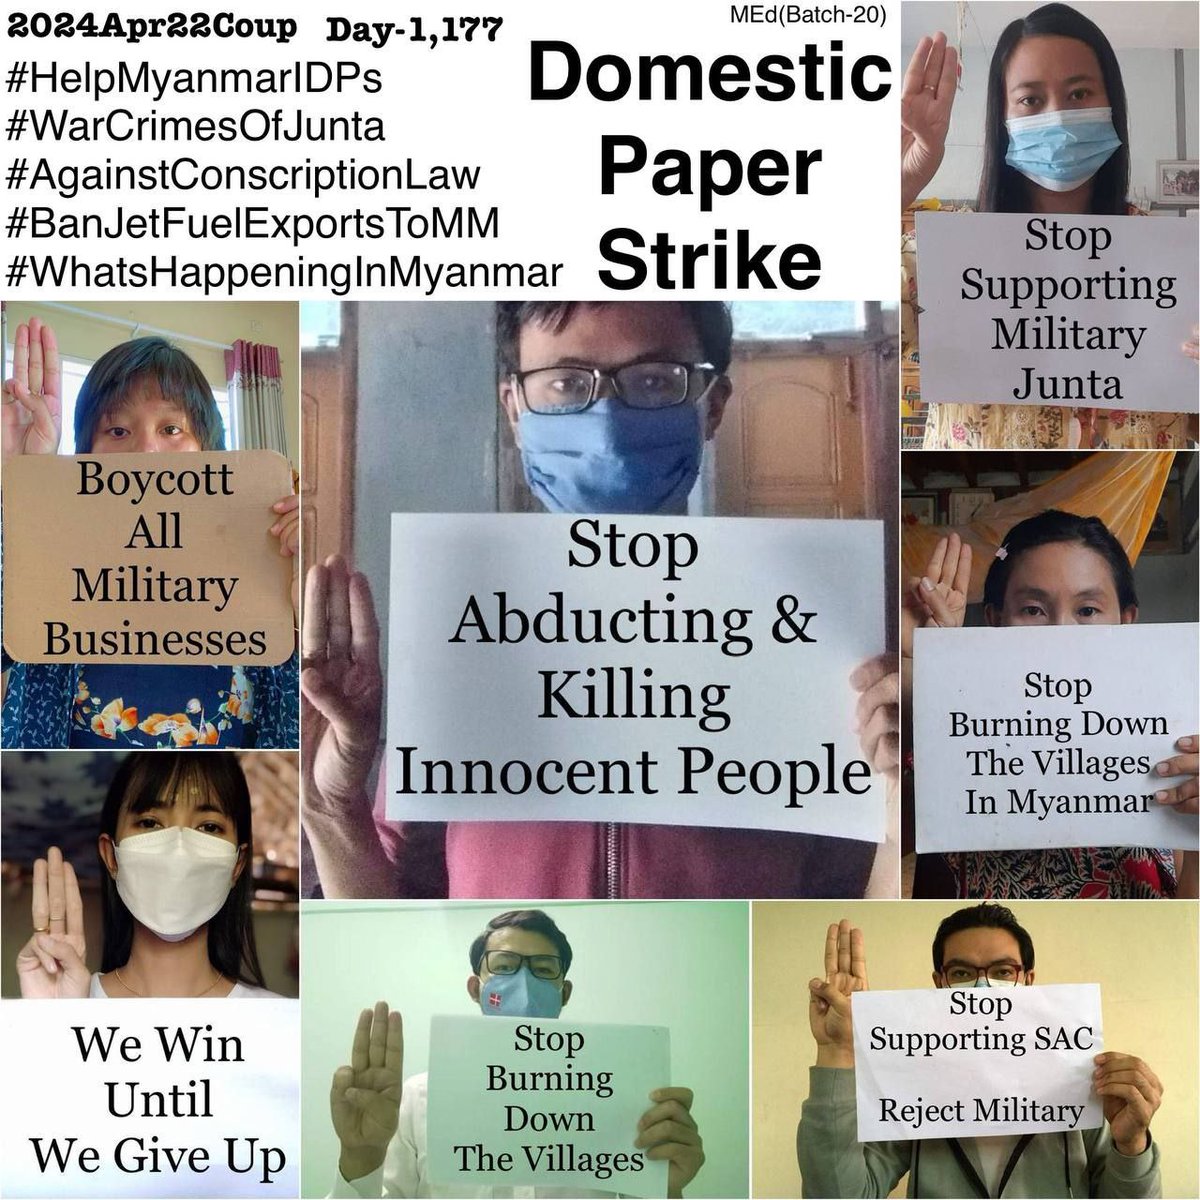 Daily anti-coup revolutionary domestic strike by pro-democracy CDMer teachers from Sagaing University of Education as 1,177th day.  #2024Apr23Coup #AgainstConscriptionLaw #WhatsHappeningInMyanmar